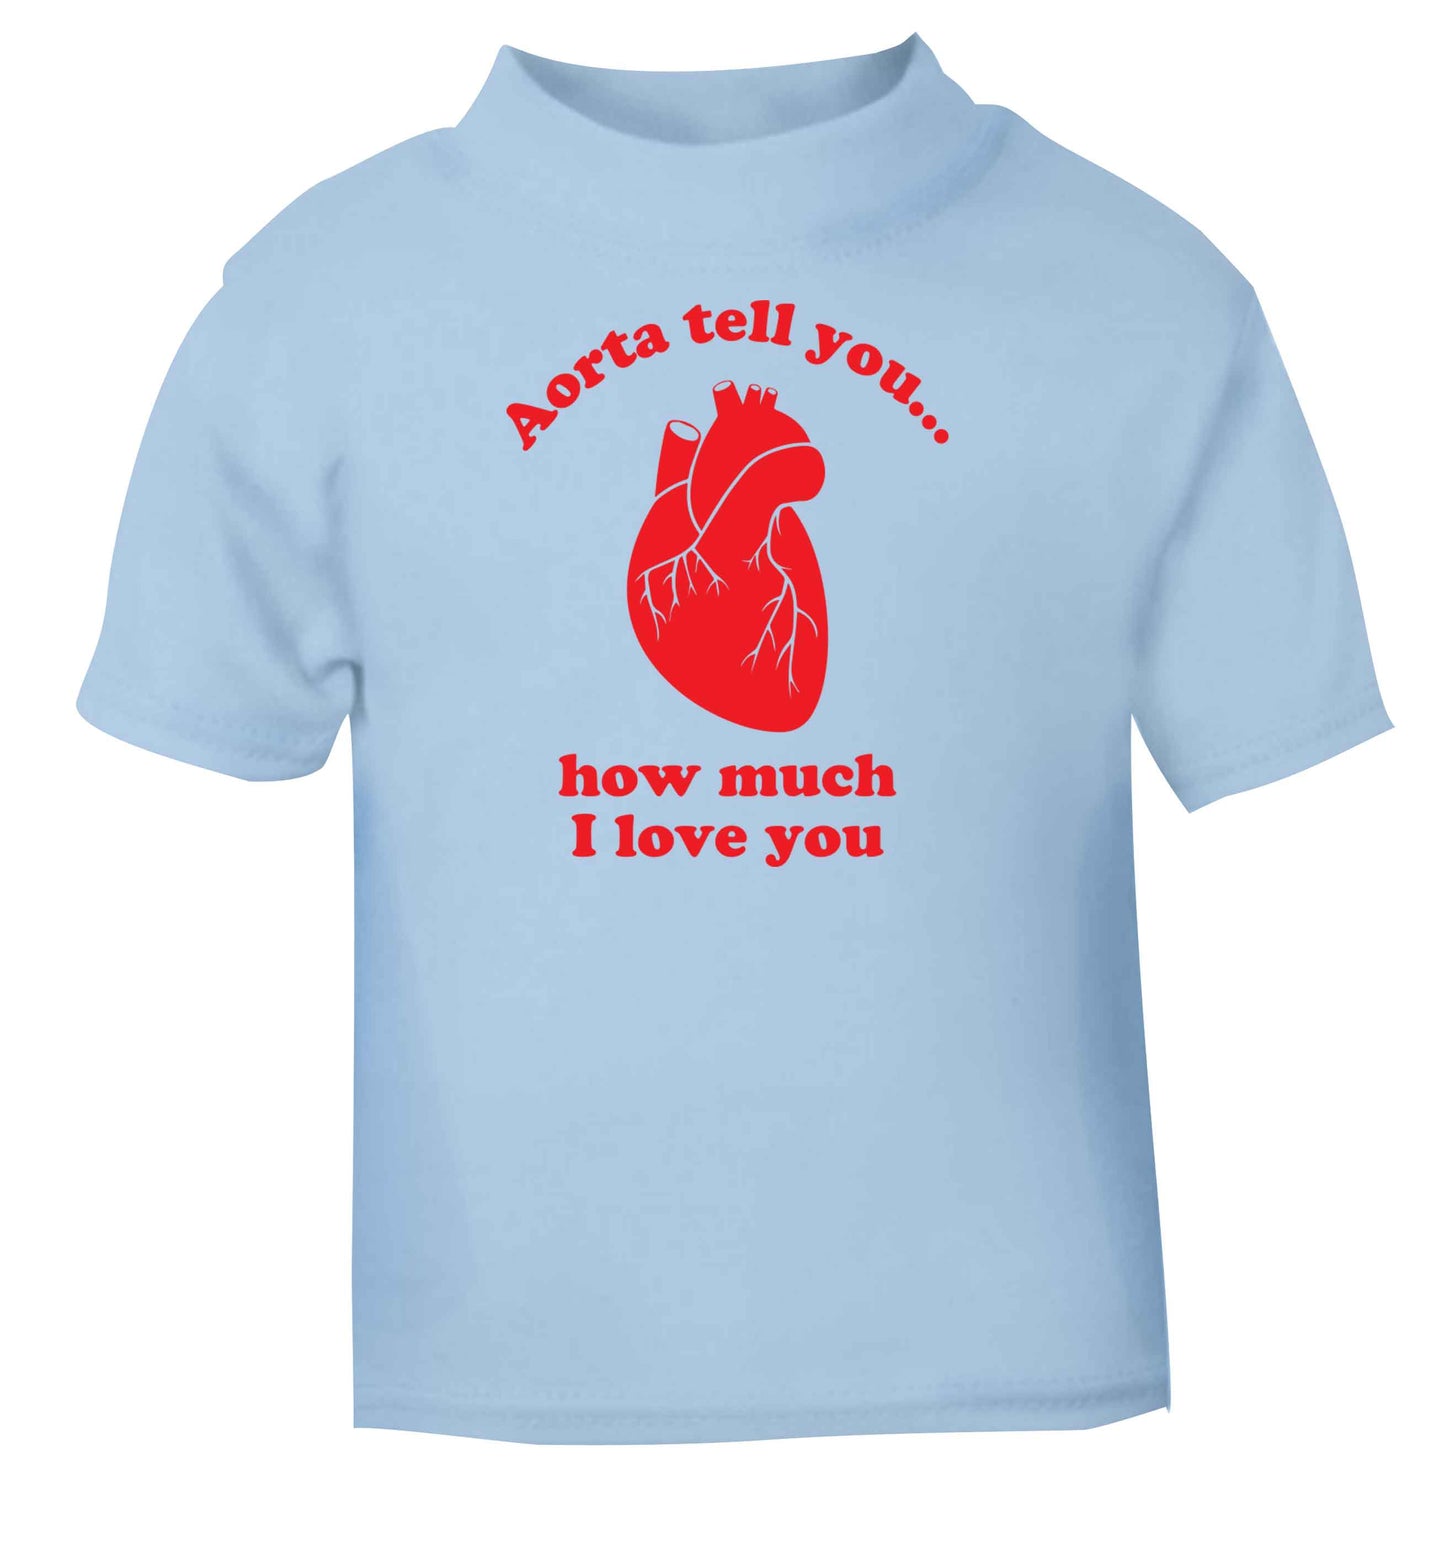 Aorta tell you how much I love you light blue baby toddler Tshirt 2 Years